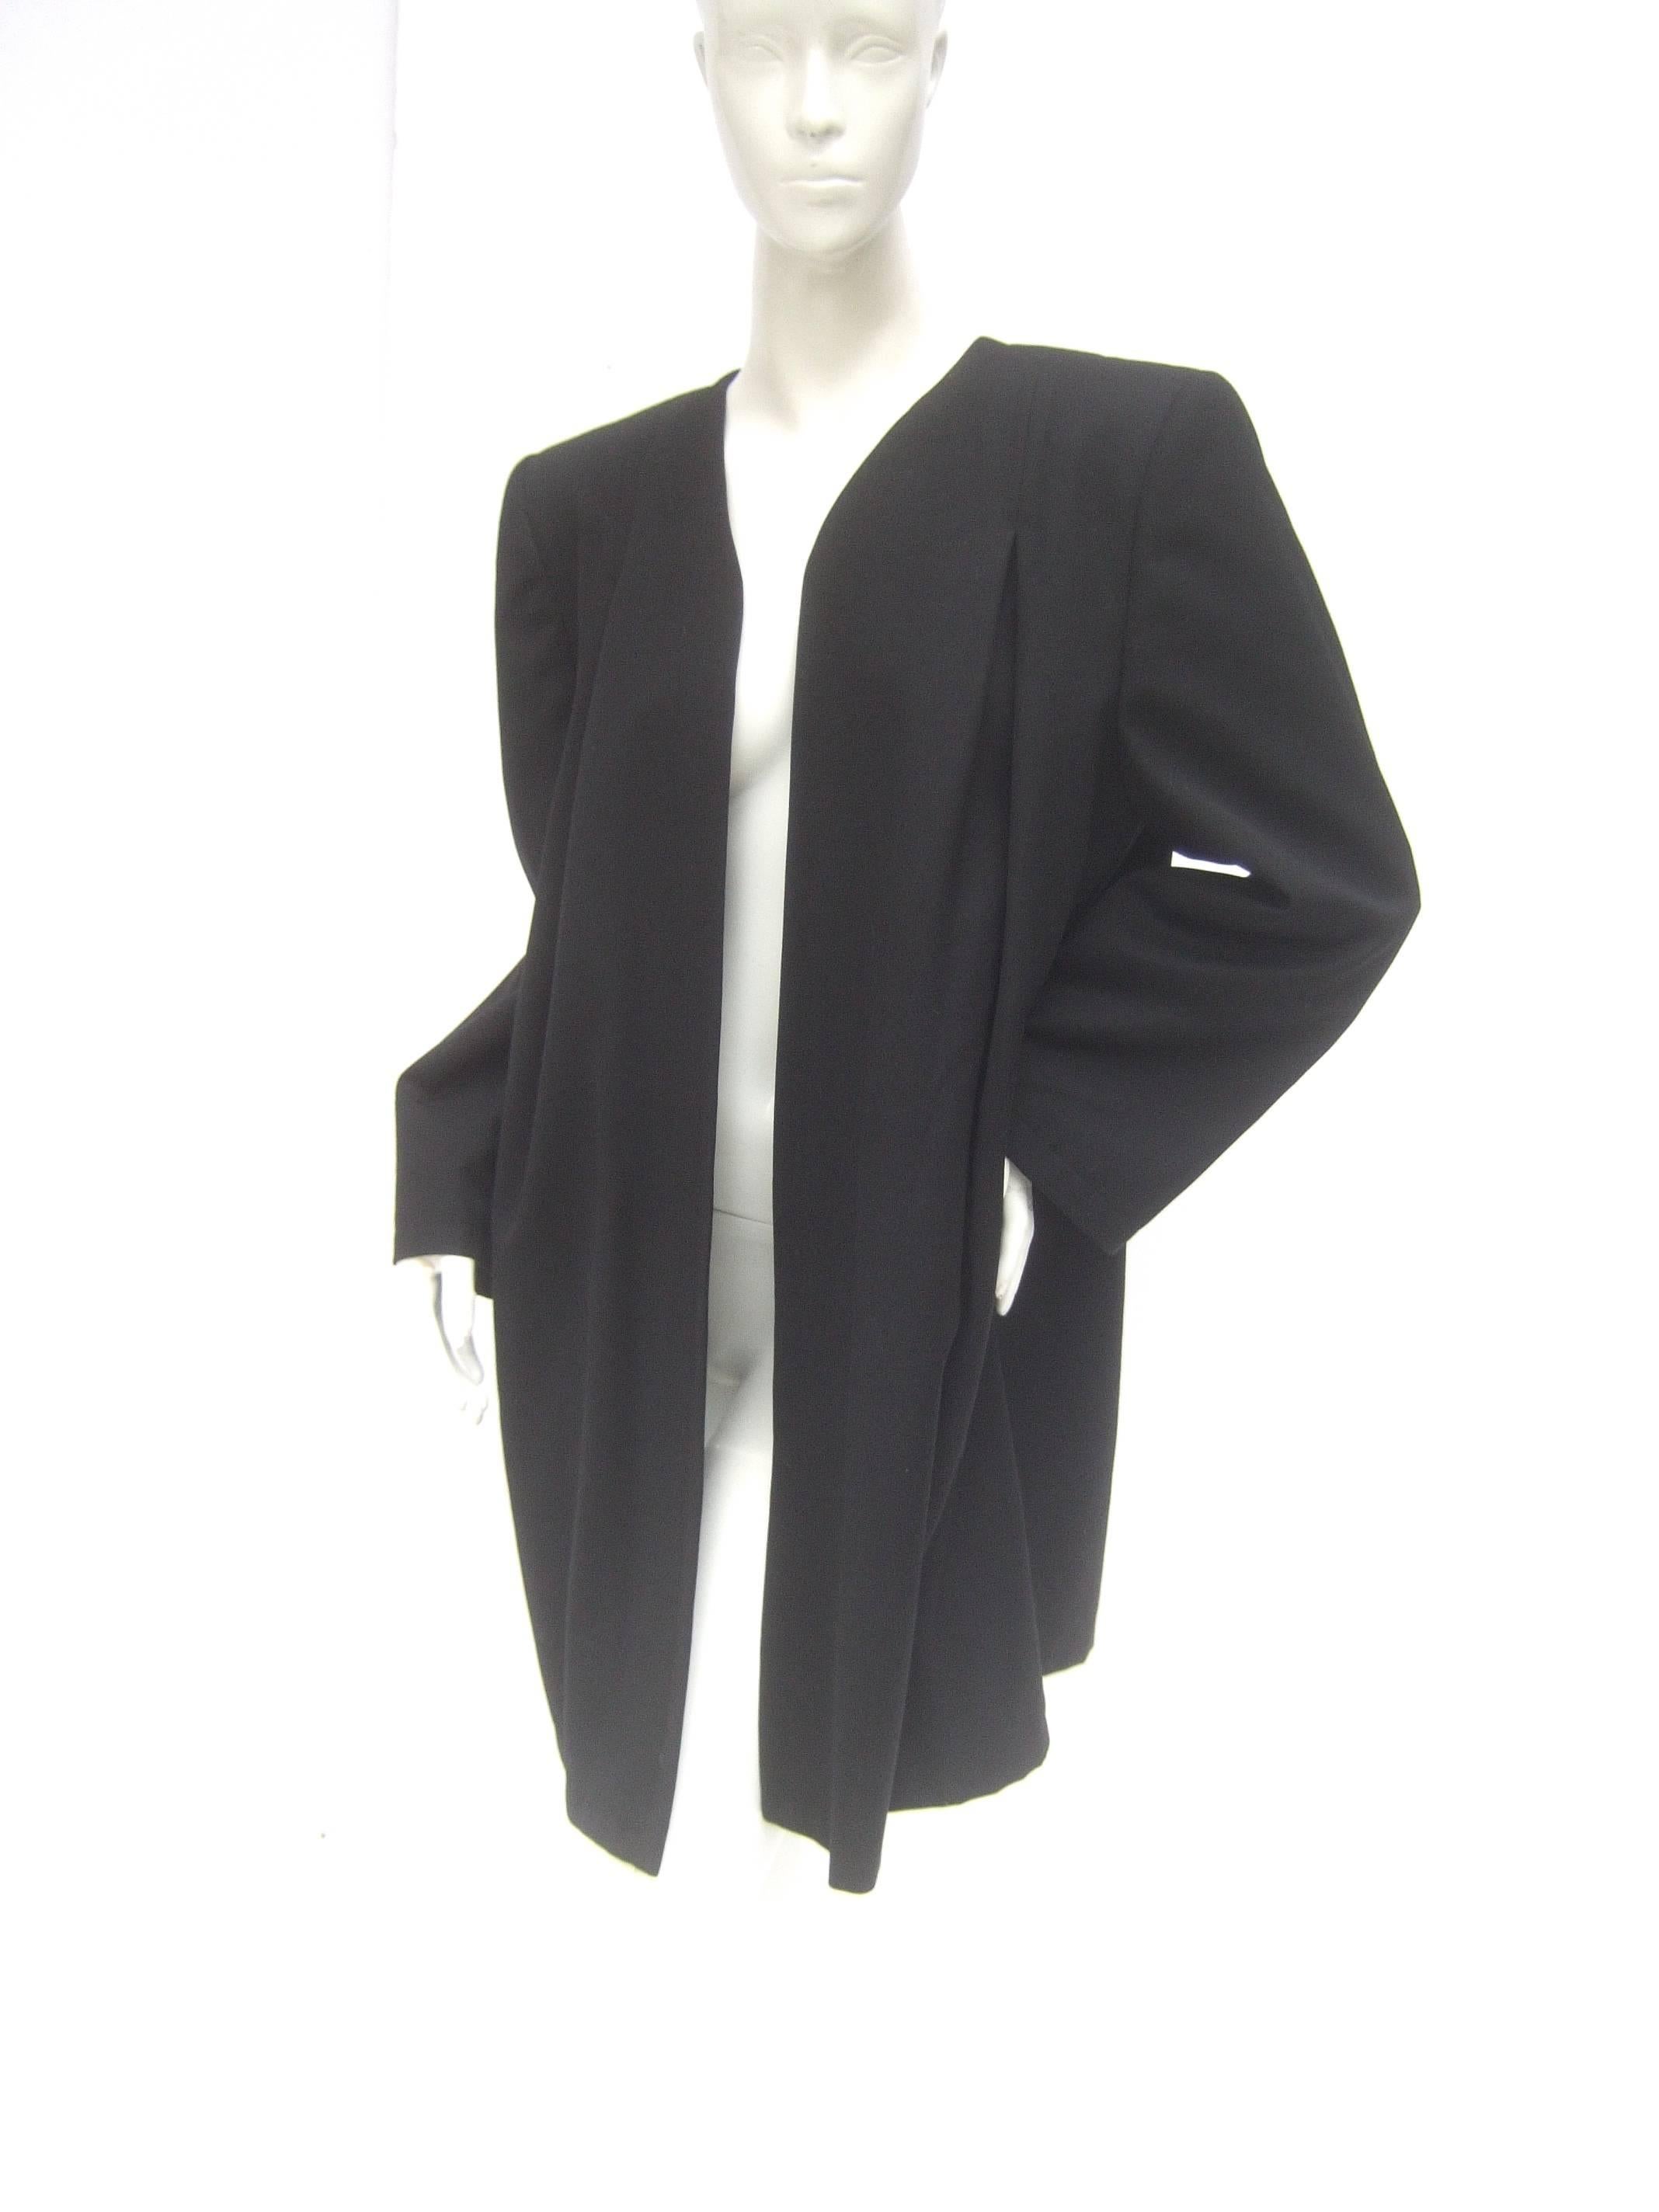 Valentino Italian light weight black wool duster jacket c 1980s
The elongated black jacket makes a chic timeless garment 

Designed with a subtle single partial vertical pleat that runs
down both sides of the front. Designed without buttons
or